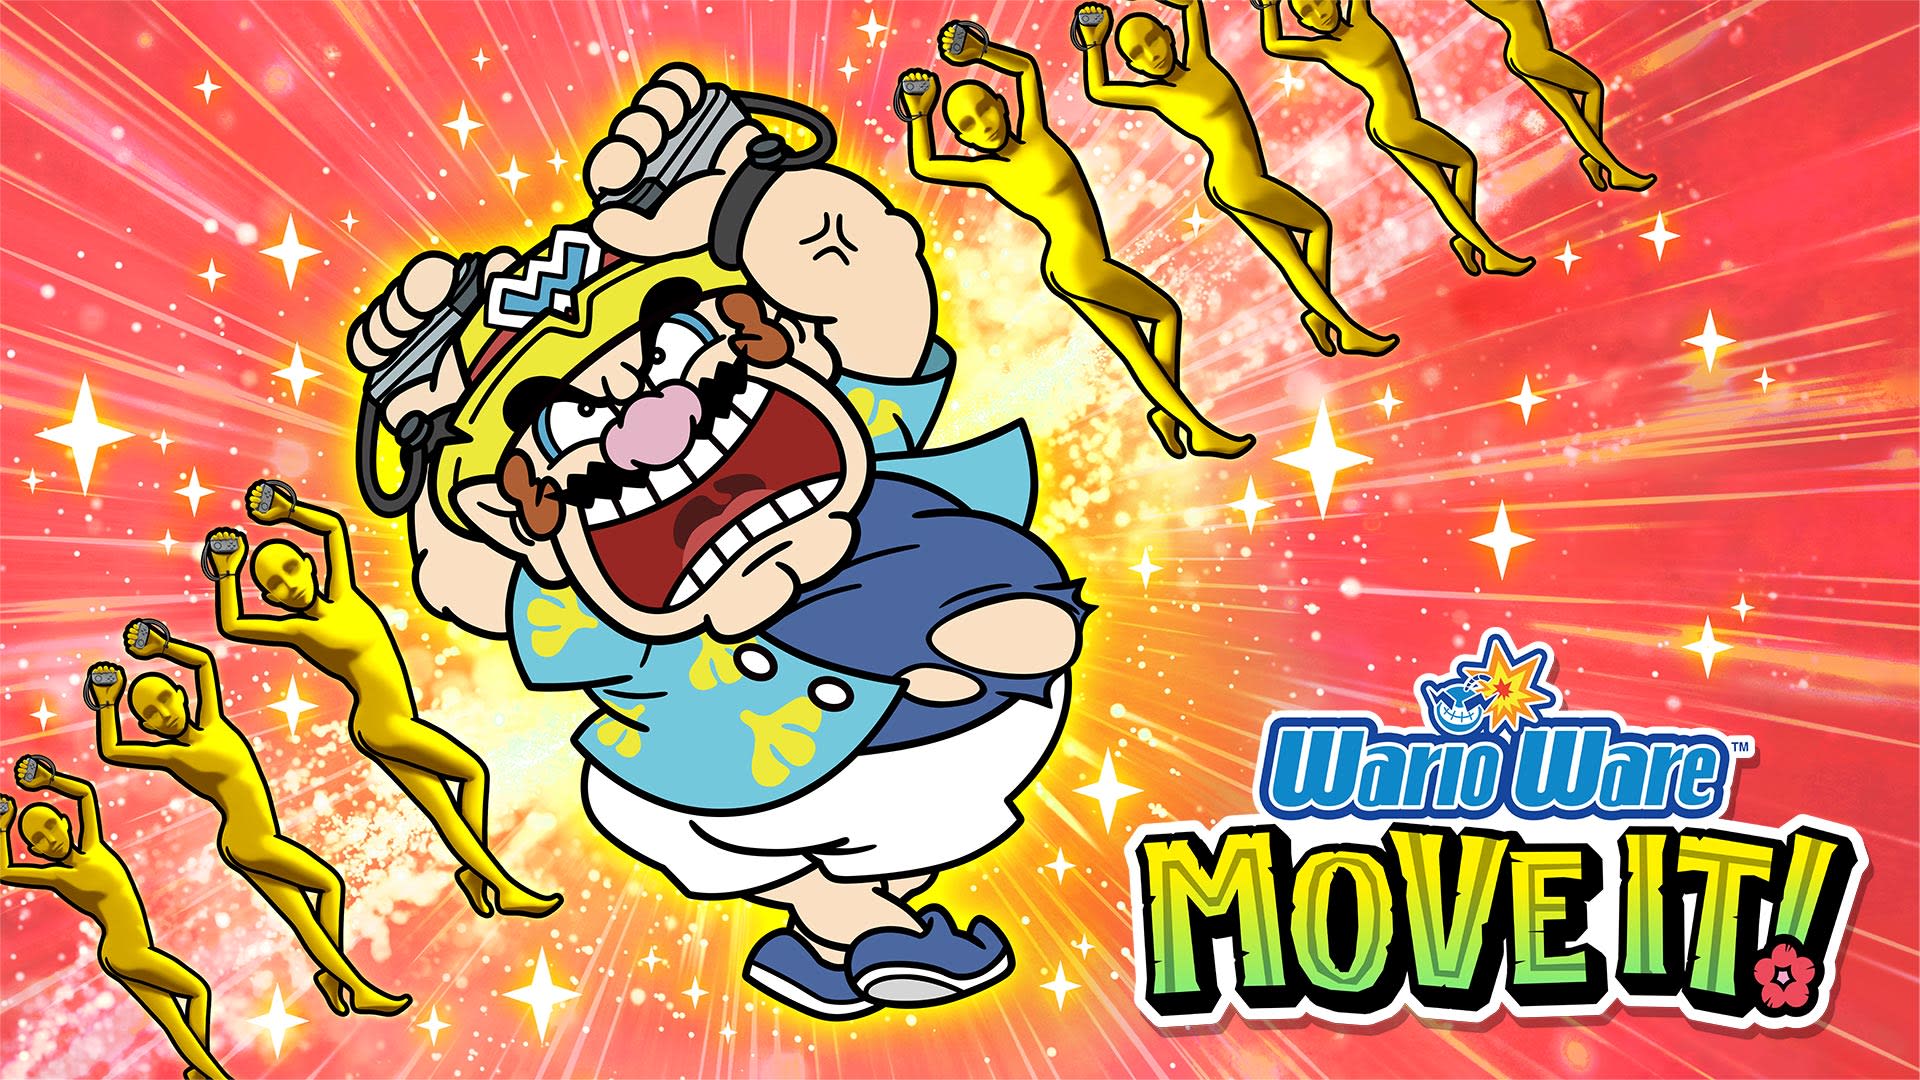 The sequel to the 2021 rhythmic action game WarioWare has been announced: Get it Together - WarioWare: Move It!